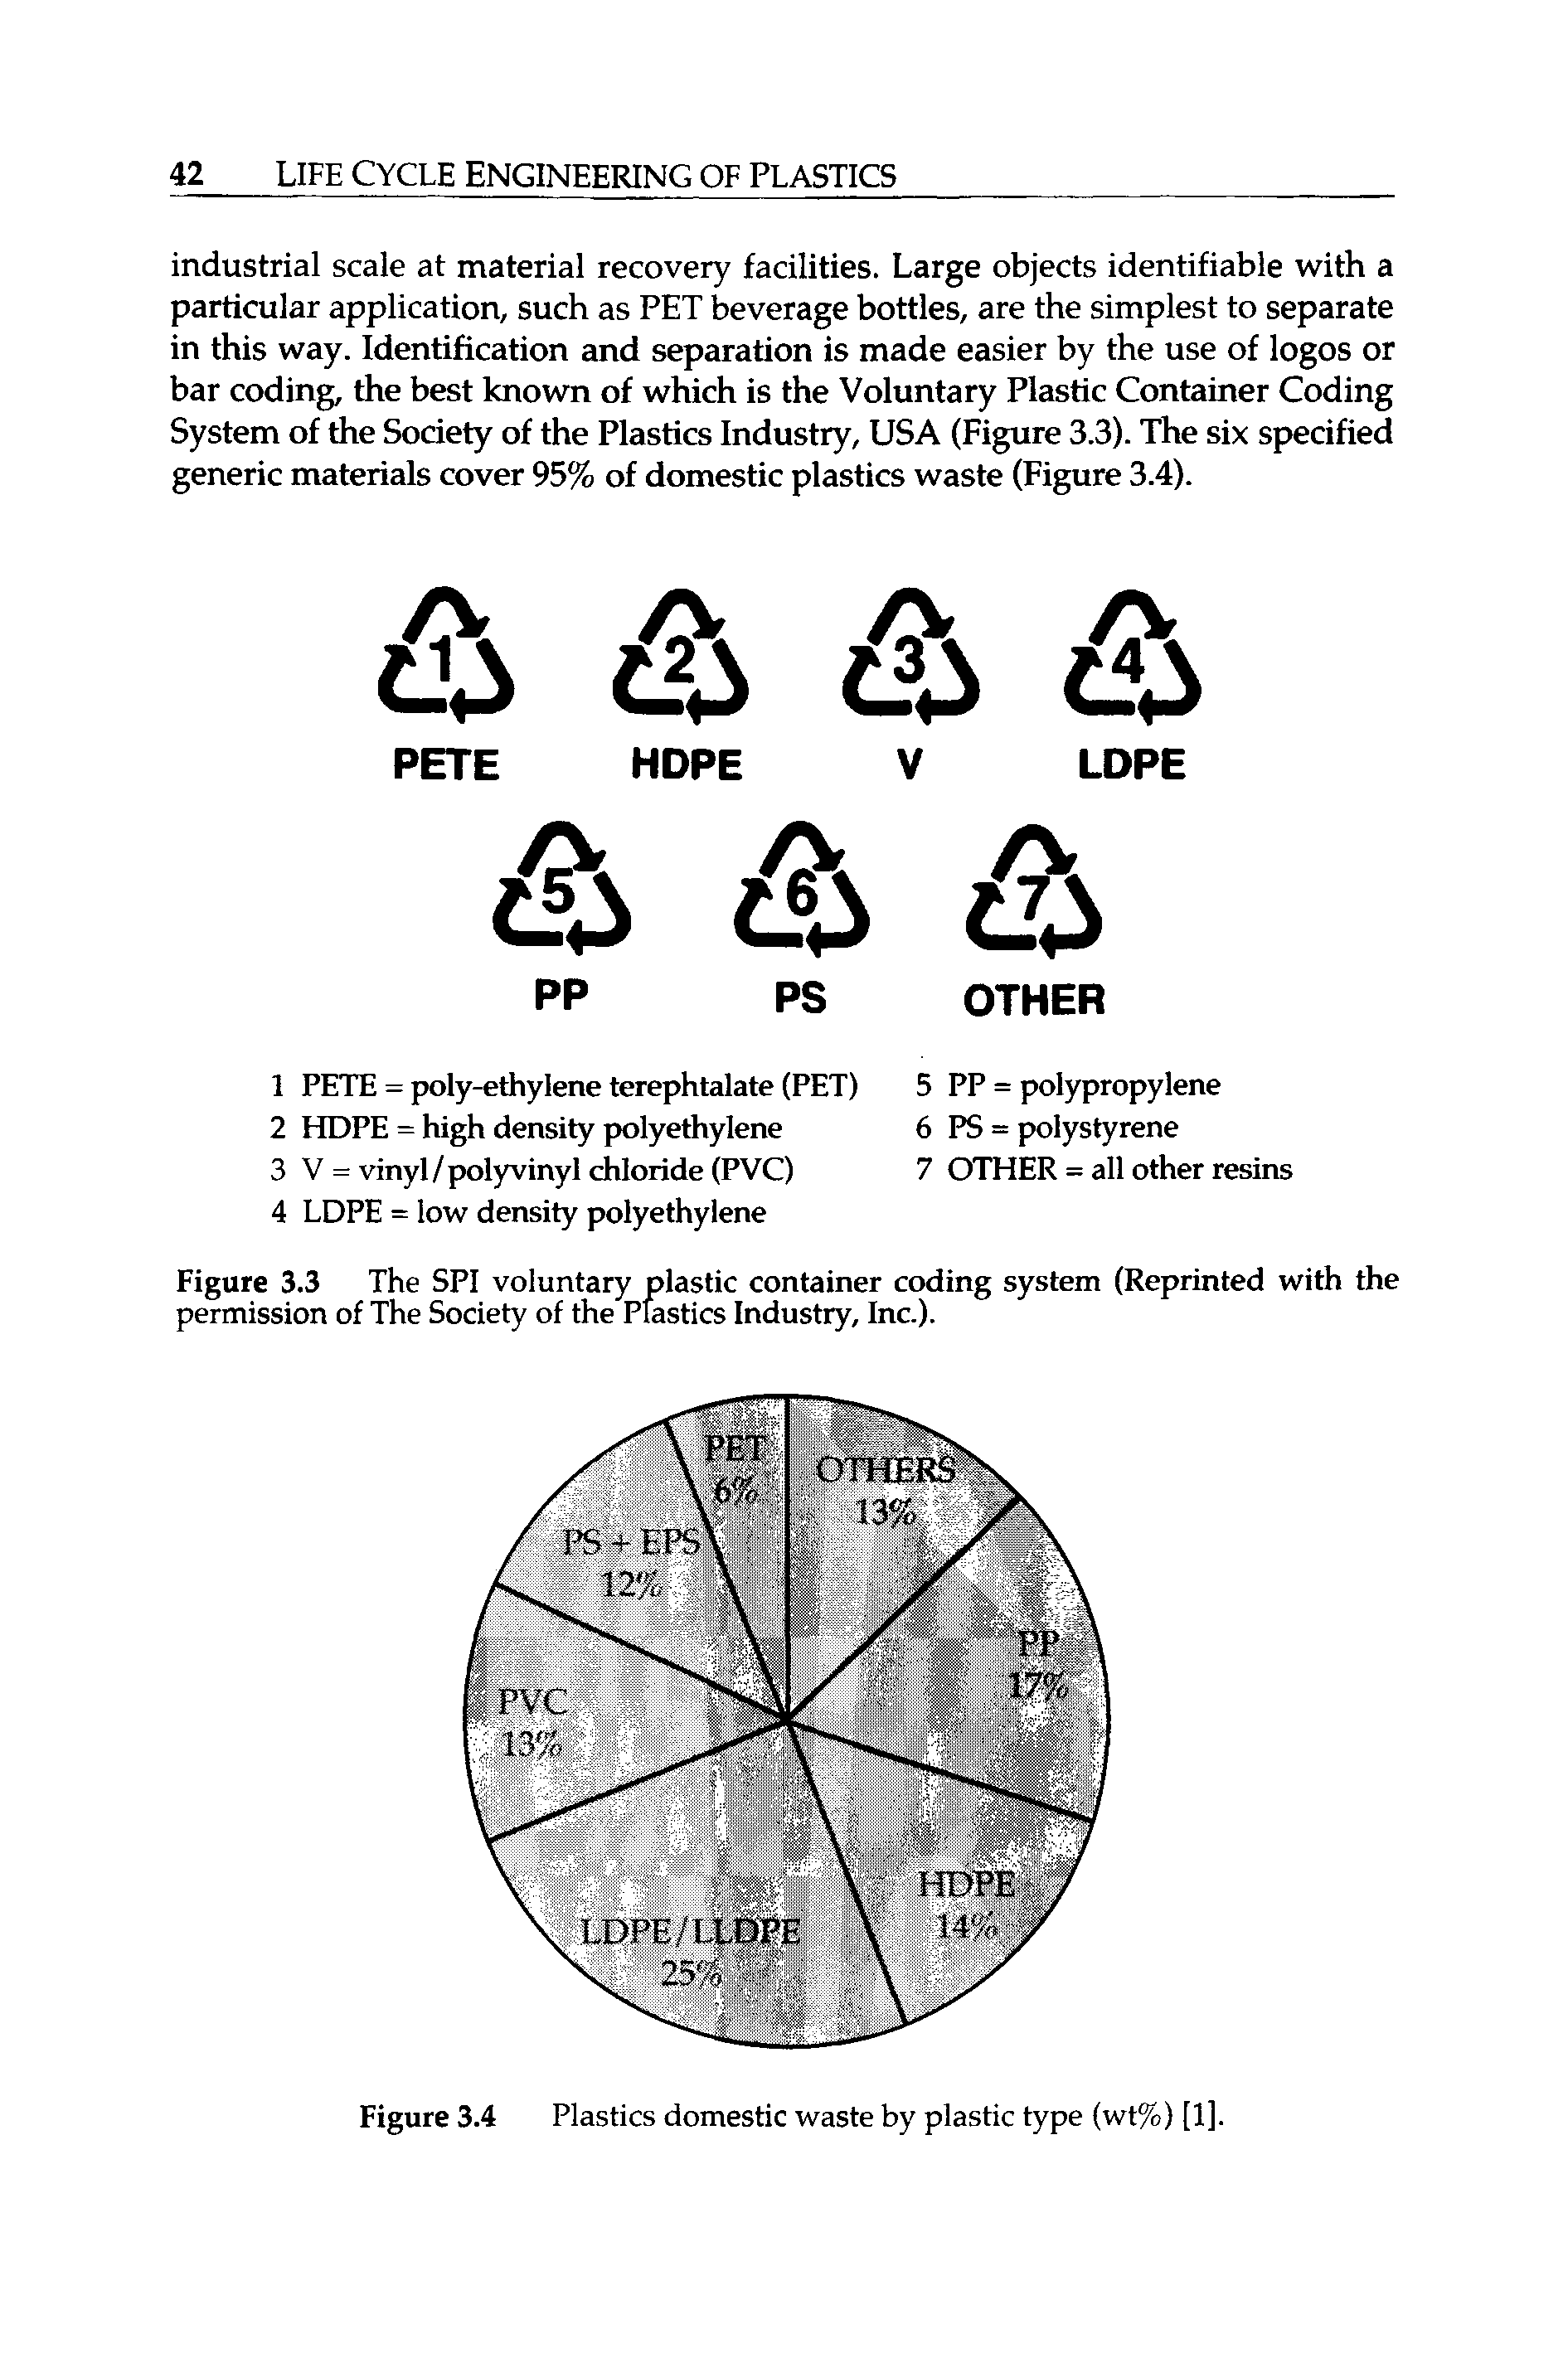 Figure 3.3 The SPI voluntary plastic container coding system (Reprinted with the permission of The Society of the Plastics Industry, Inc.).